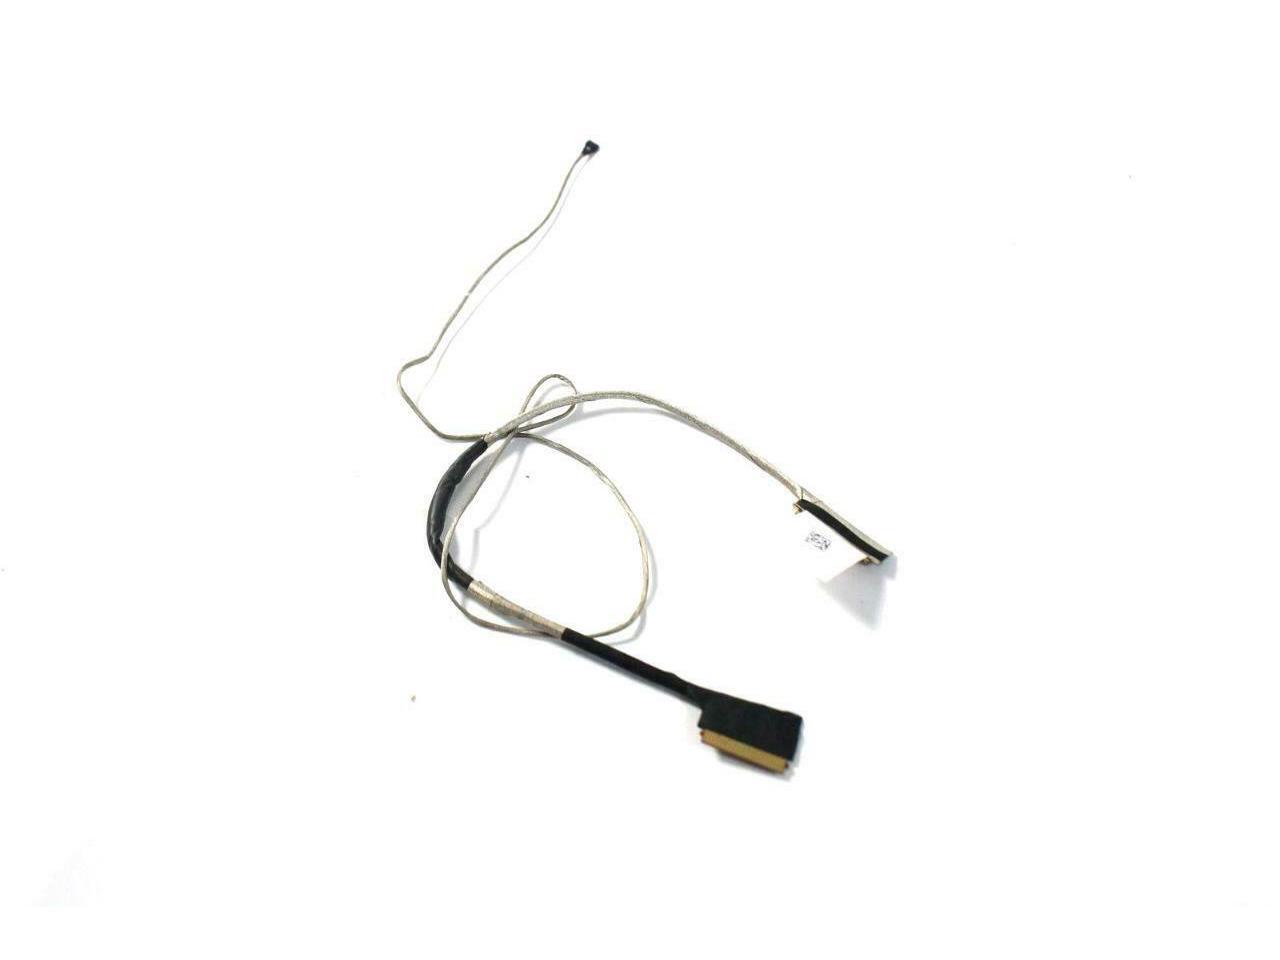 Dell D6W30 New LCD LED Display Video Cable Touchsreen Inspiron 15-3551 15-3552 0D6W30 DC020028F00